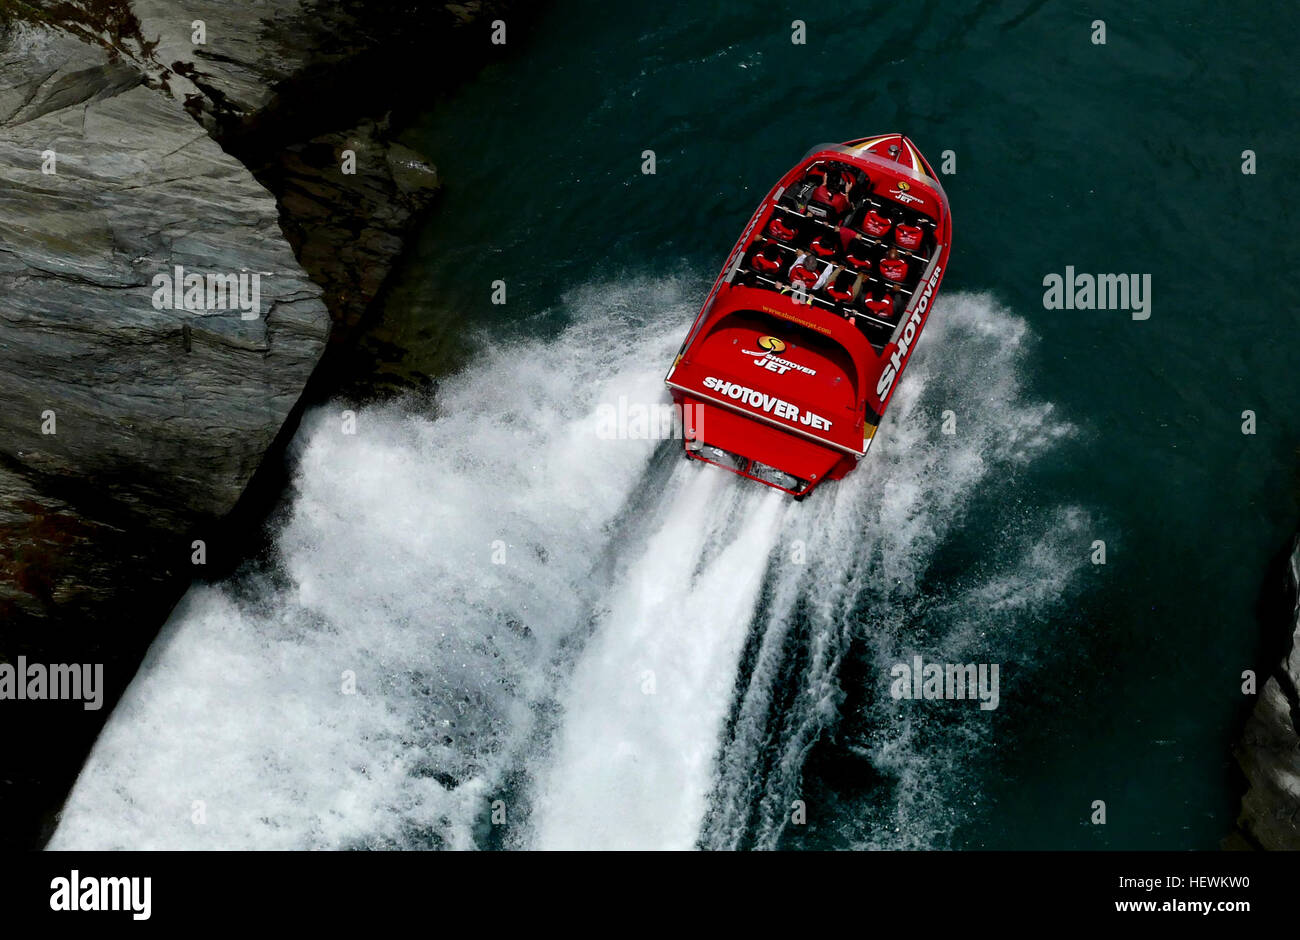 Shotover Jet  'Can you handle the canyons?' with award winning Shotover Jet, ‘The World’s Most Exciting Jet Boat Ride’ and the only company permitted to operate in the spectacular Shotover River Canyons. Stock Photo